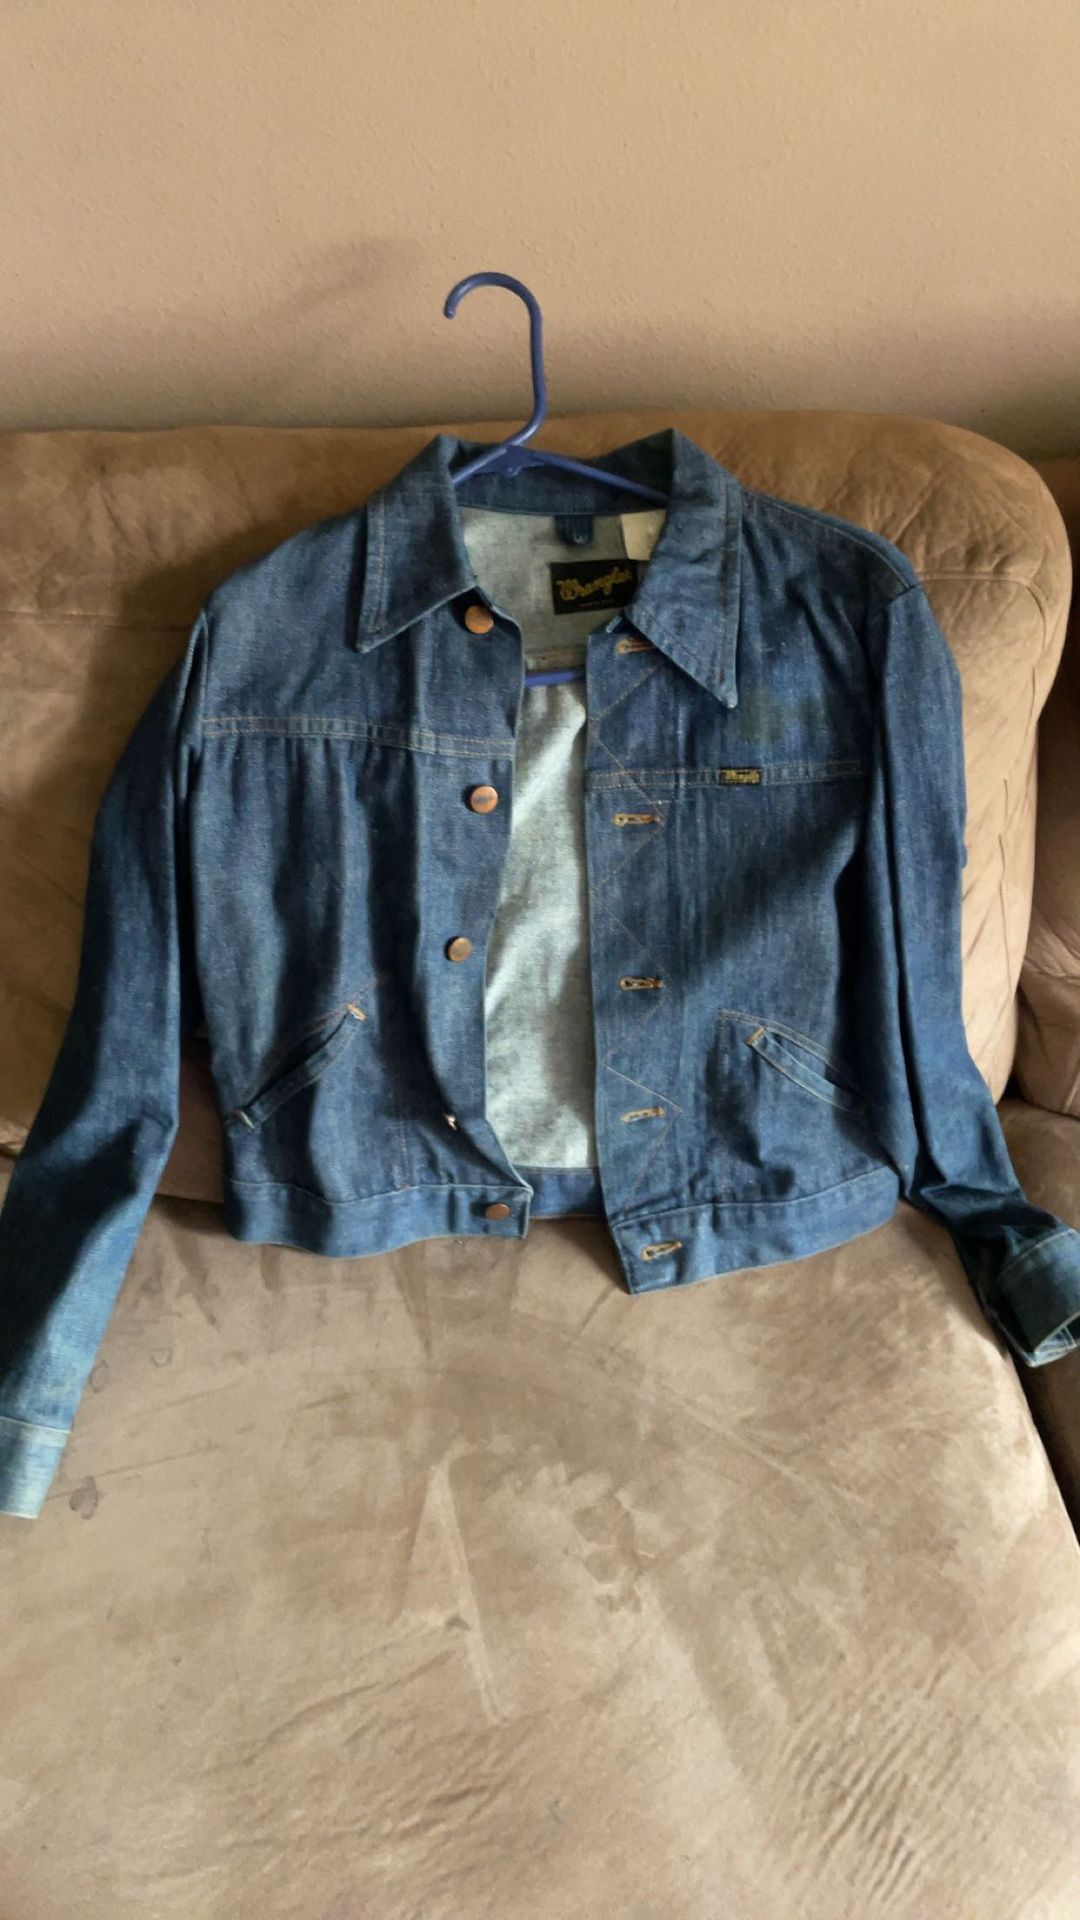 Vintage Wrangler Jean Jacket From the 70’s